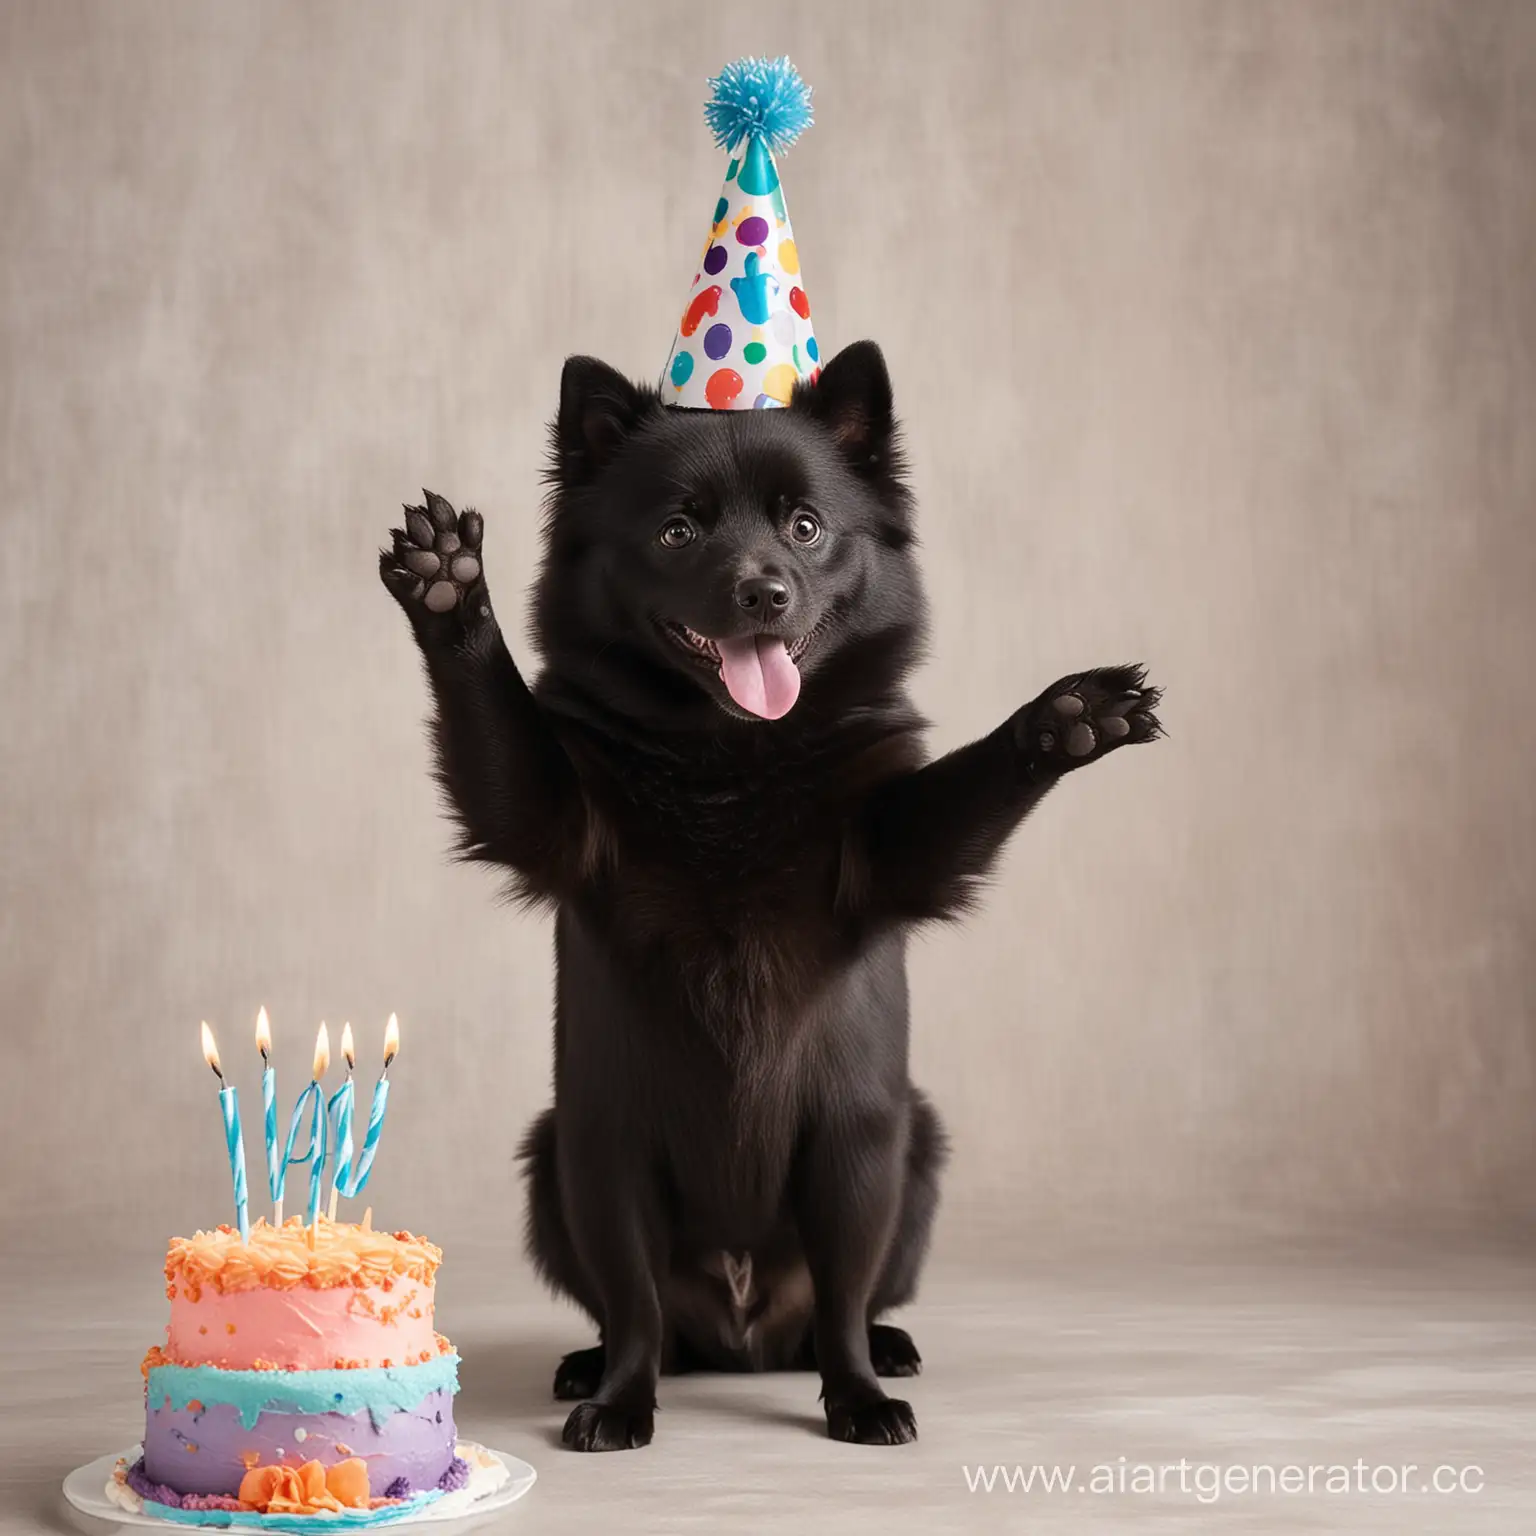 Schipperke-Dog-Wishing-Happy-Birthday-with-Paw-Wave-and-Smiling